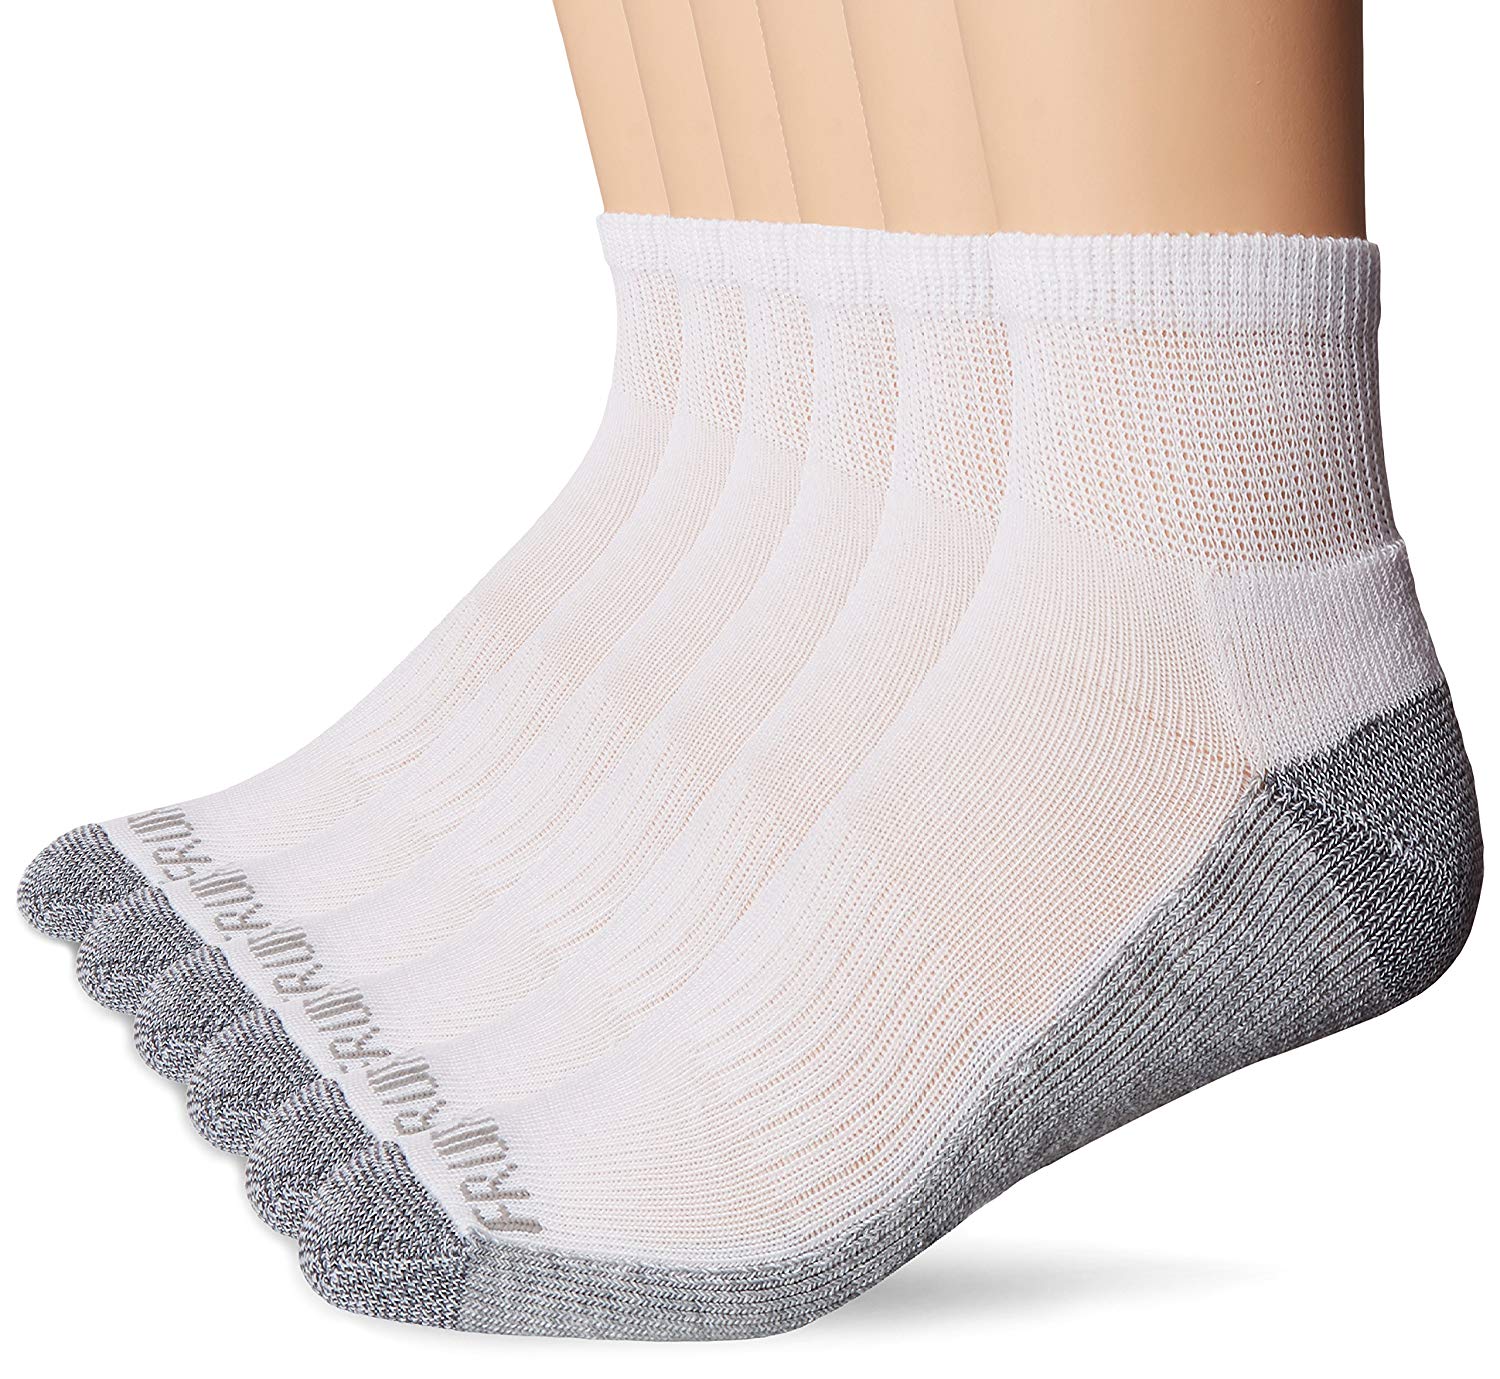 M7121B6Z - Fruit of the Loom Mens Cushioned Ankle Socks 6 Pairs